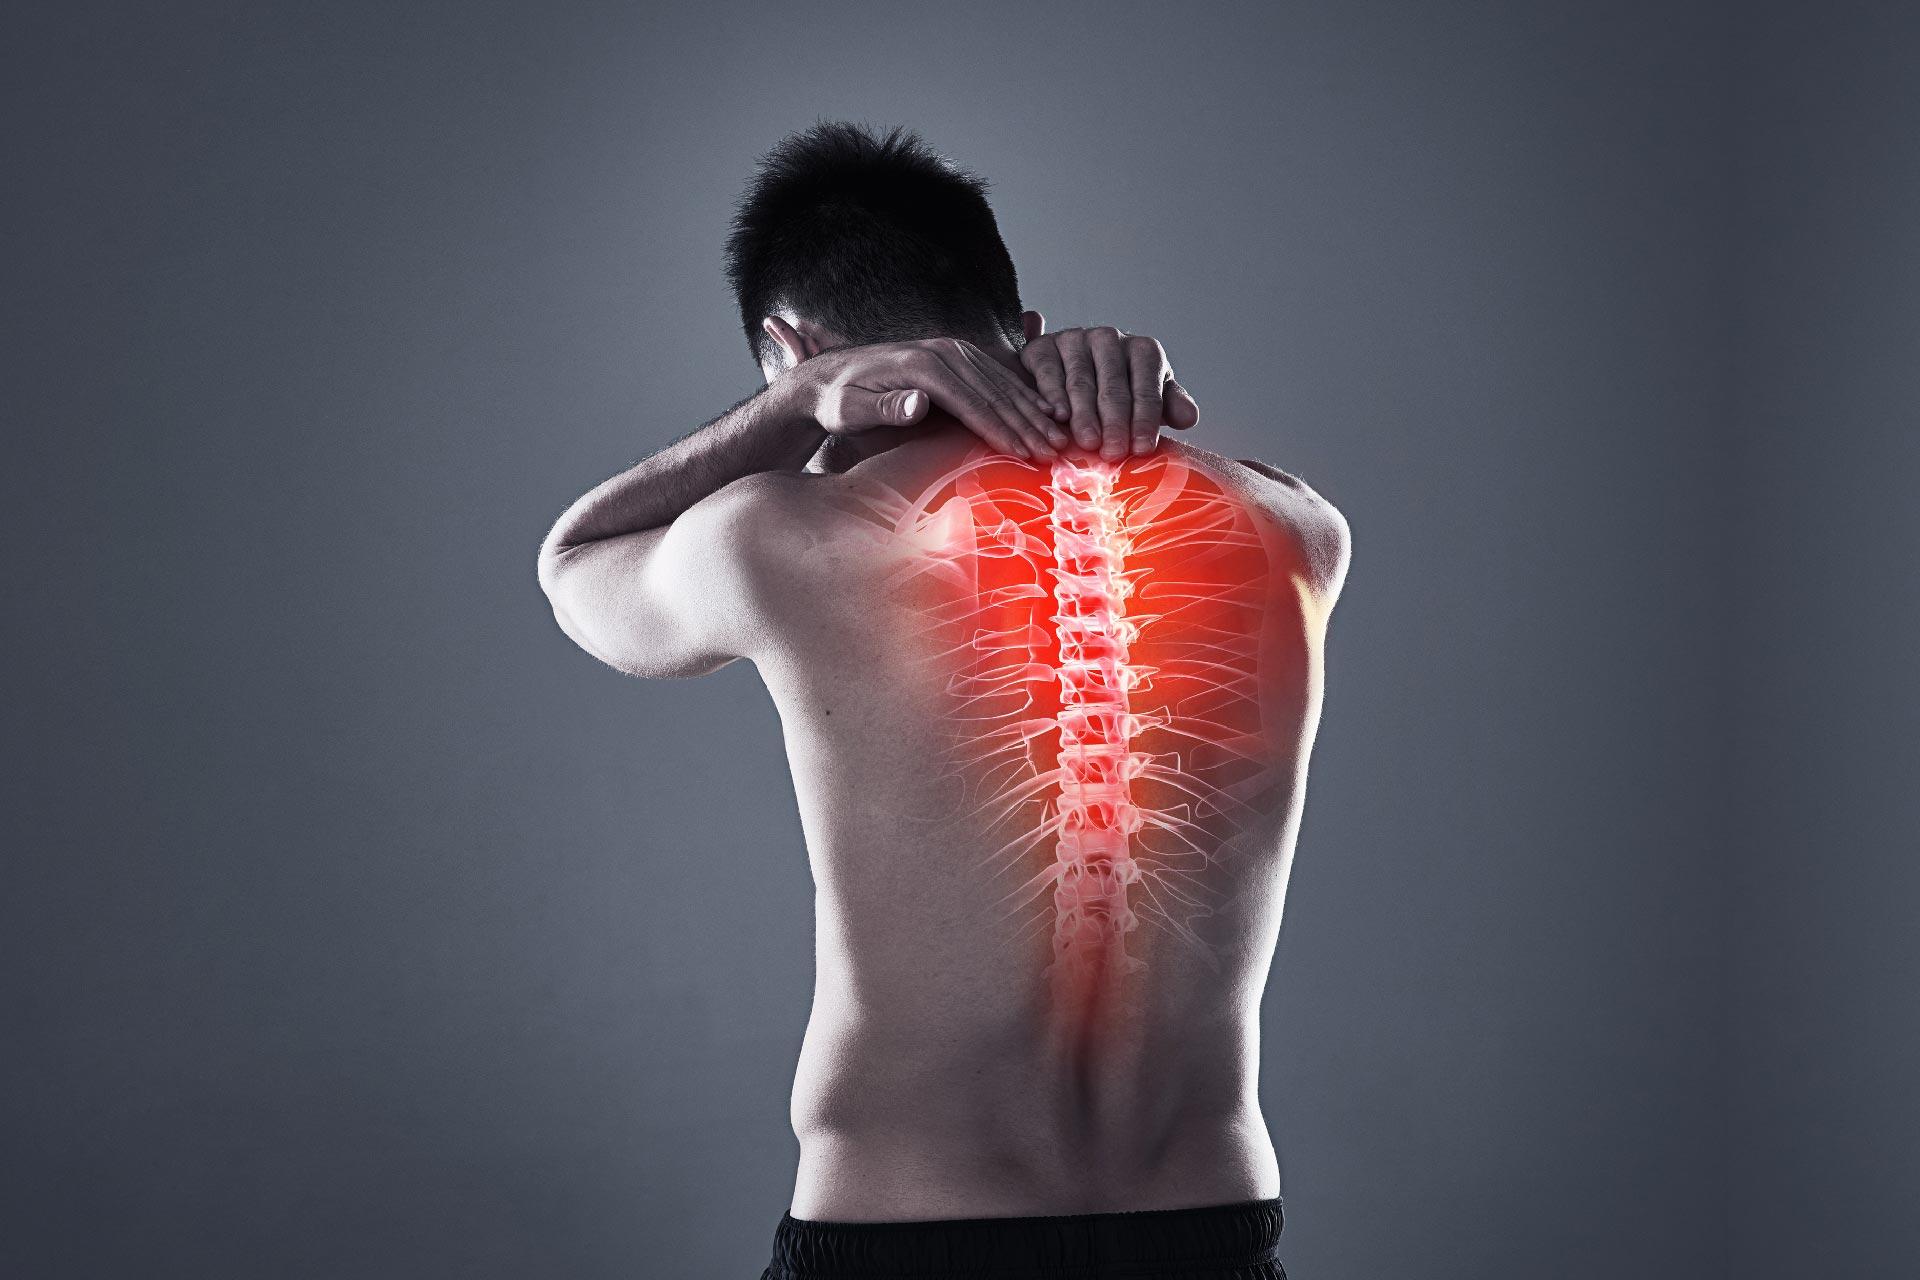 Spinal Cord Injury Day: Details about Spinal Cord Compression